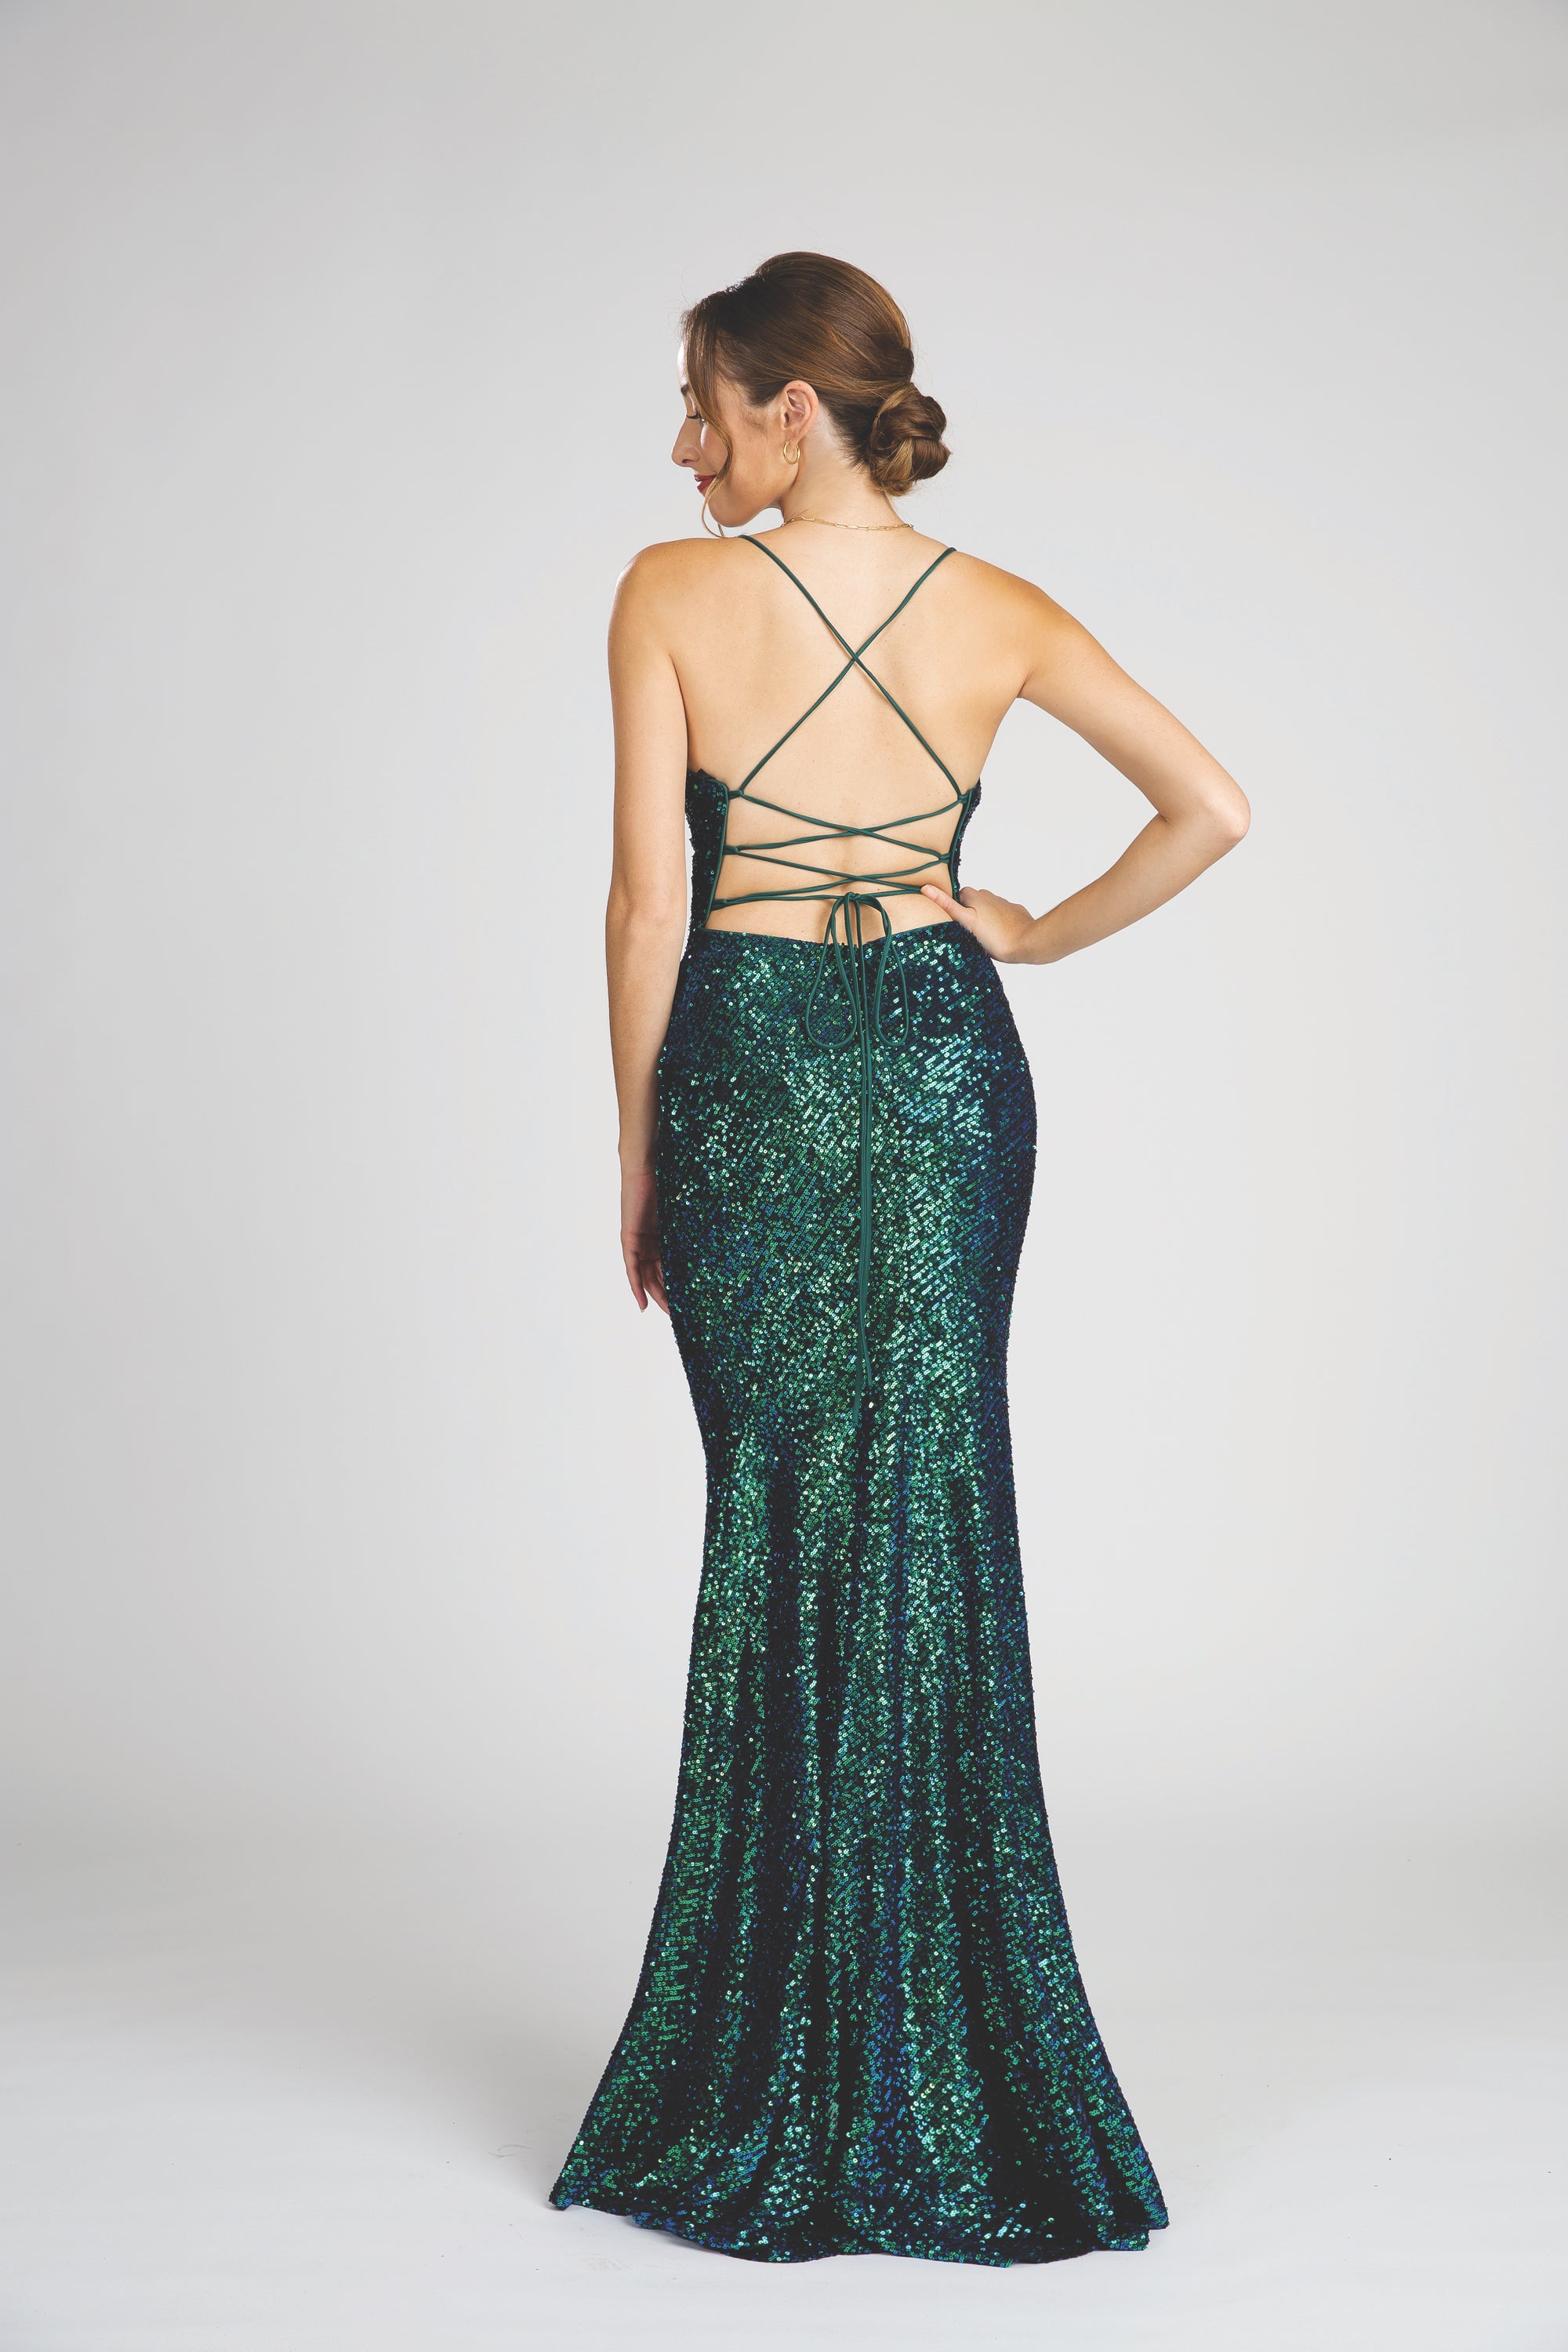 Finding the Perfect Prom Dress for Petite Girls